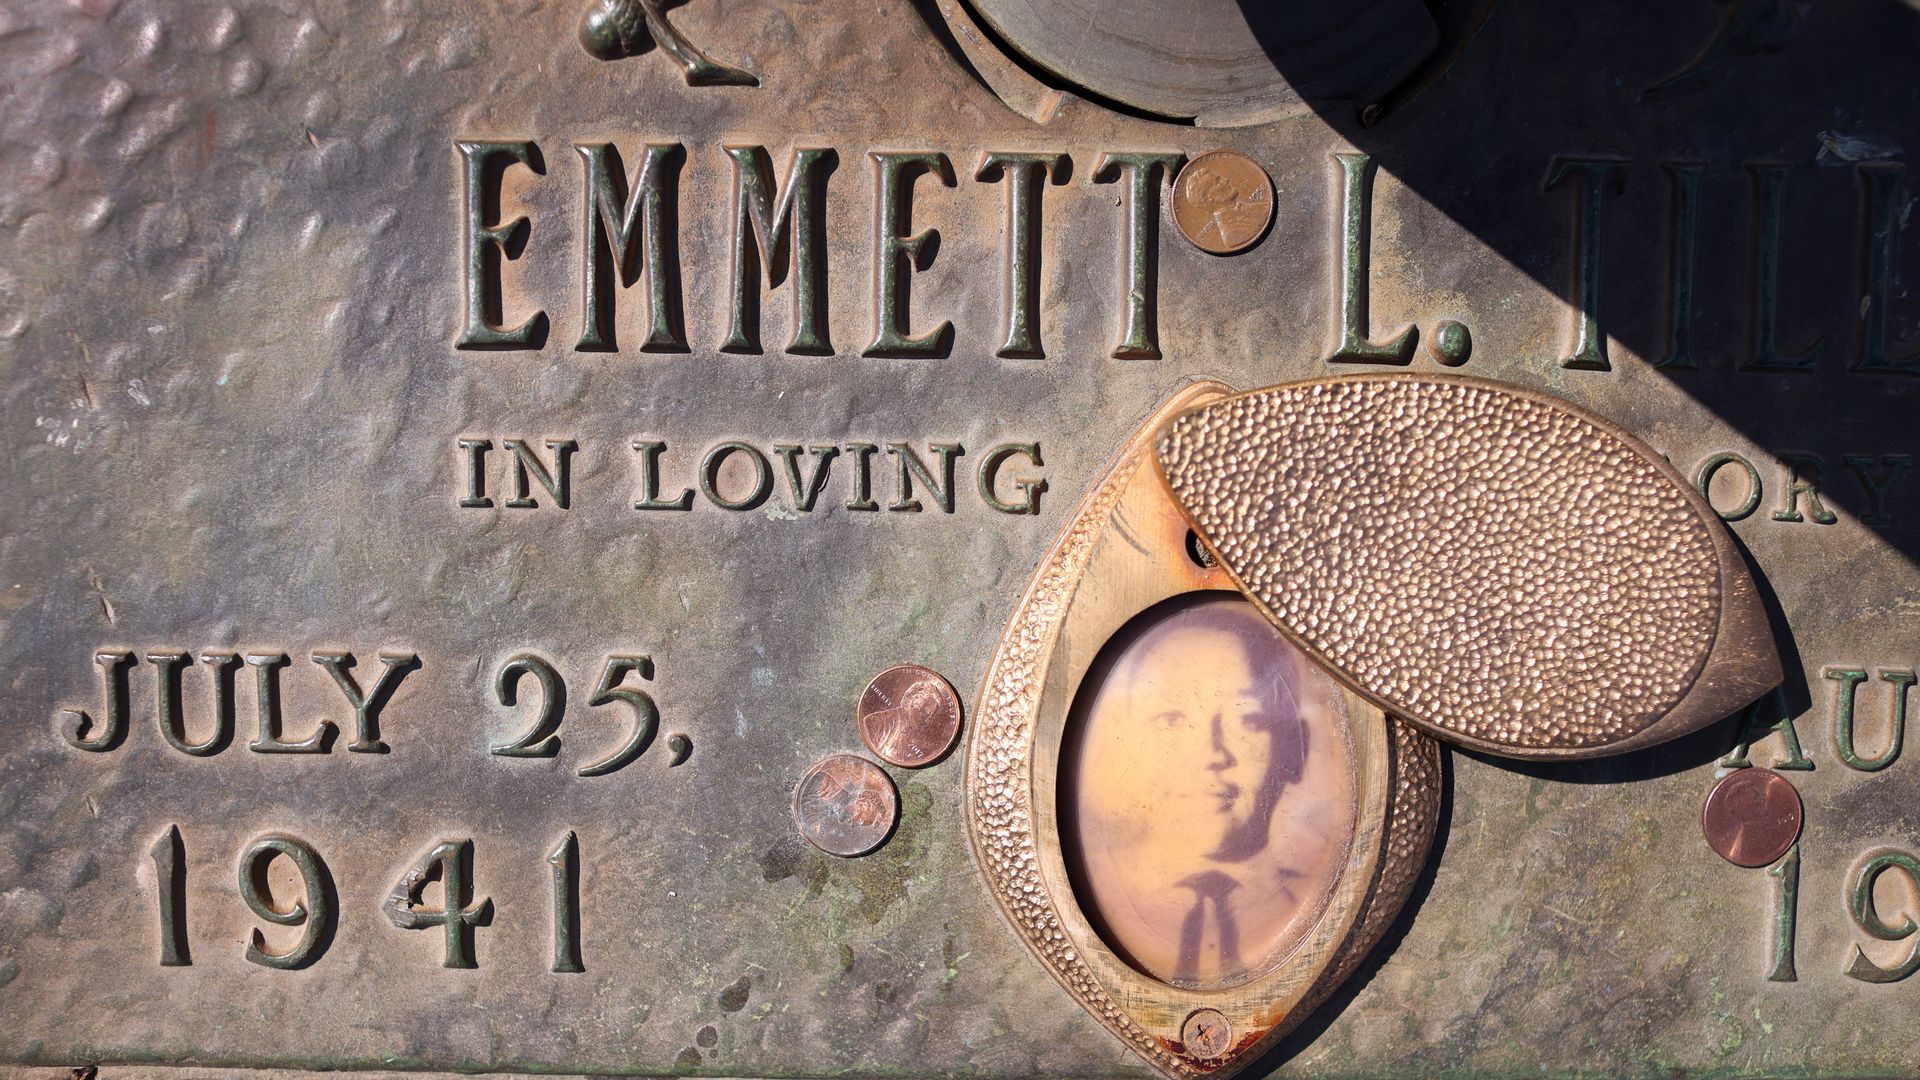 A faded photograph is attached to the headstone that marks the gravesite of Emmett Till in Burr Oak Cemetery in Chicago.